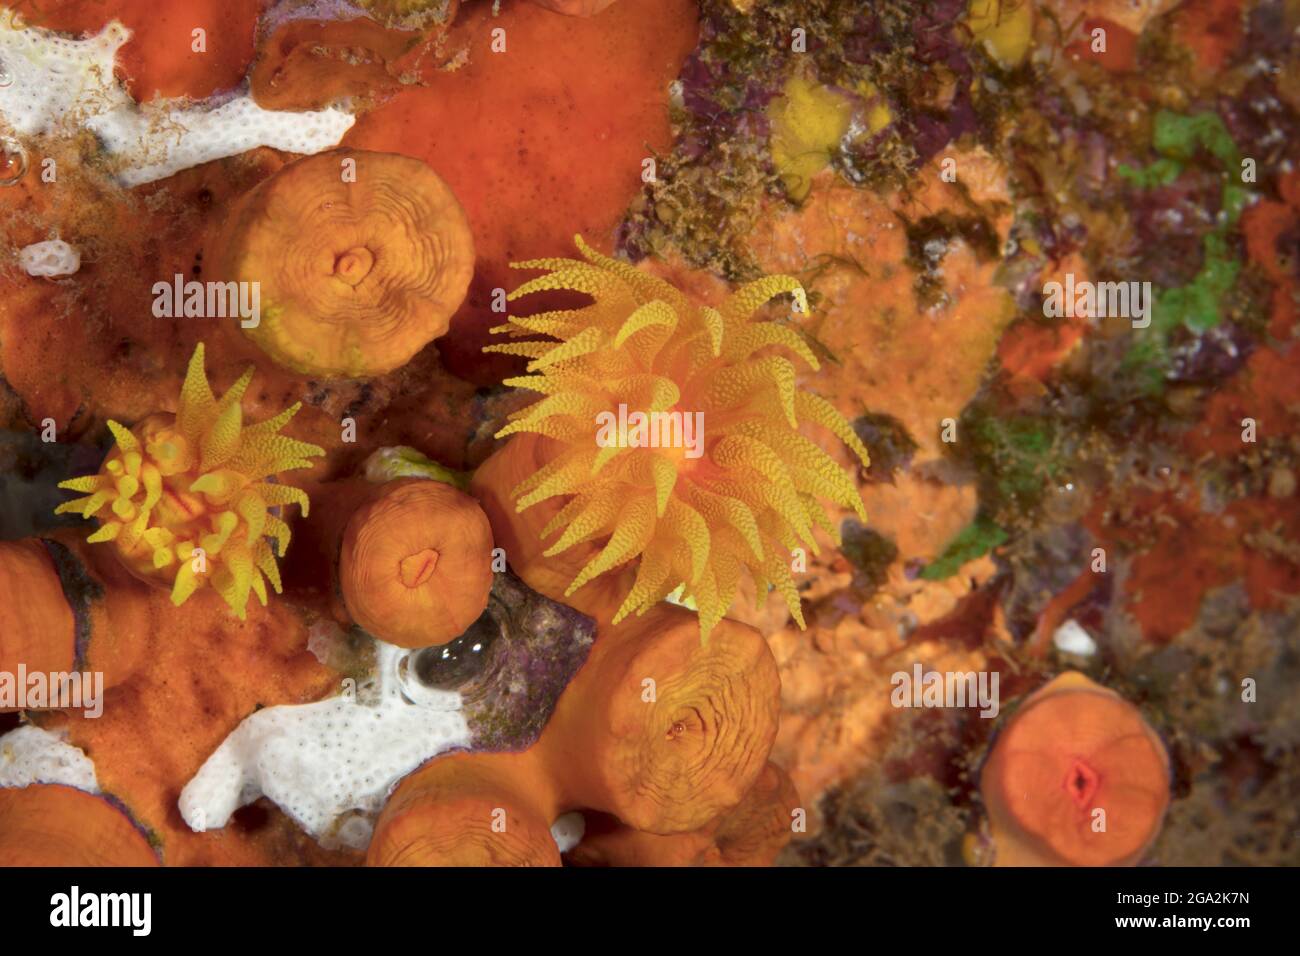 Vibrant orange cup coral (Tubastraea coccinea) on the ocean floor, some displaying its translucent tentacles; Maui, Hawaii, United States of America Stock Photo